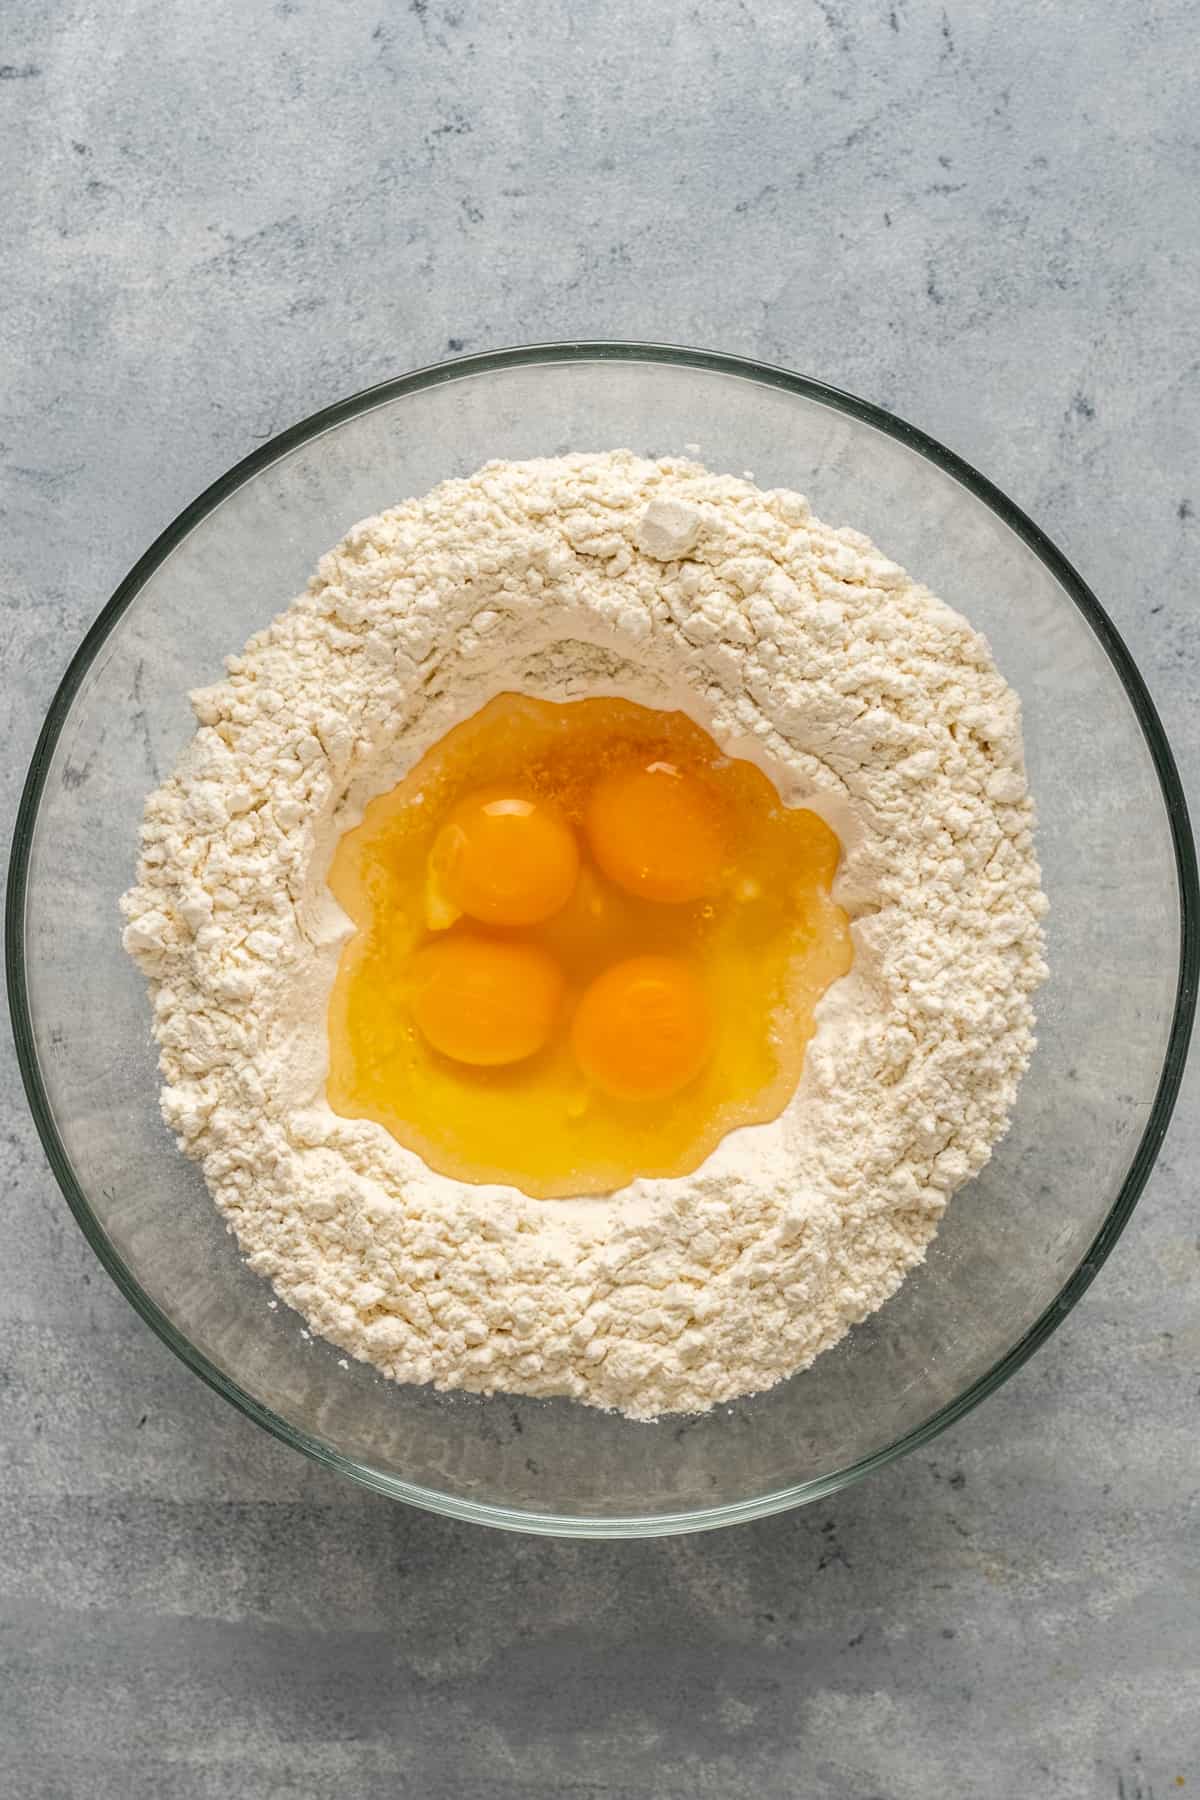 Flour in a glass bowl and eggs in the middle of it.